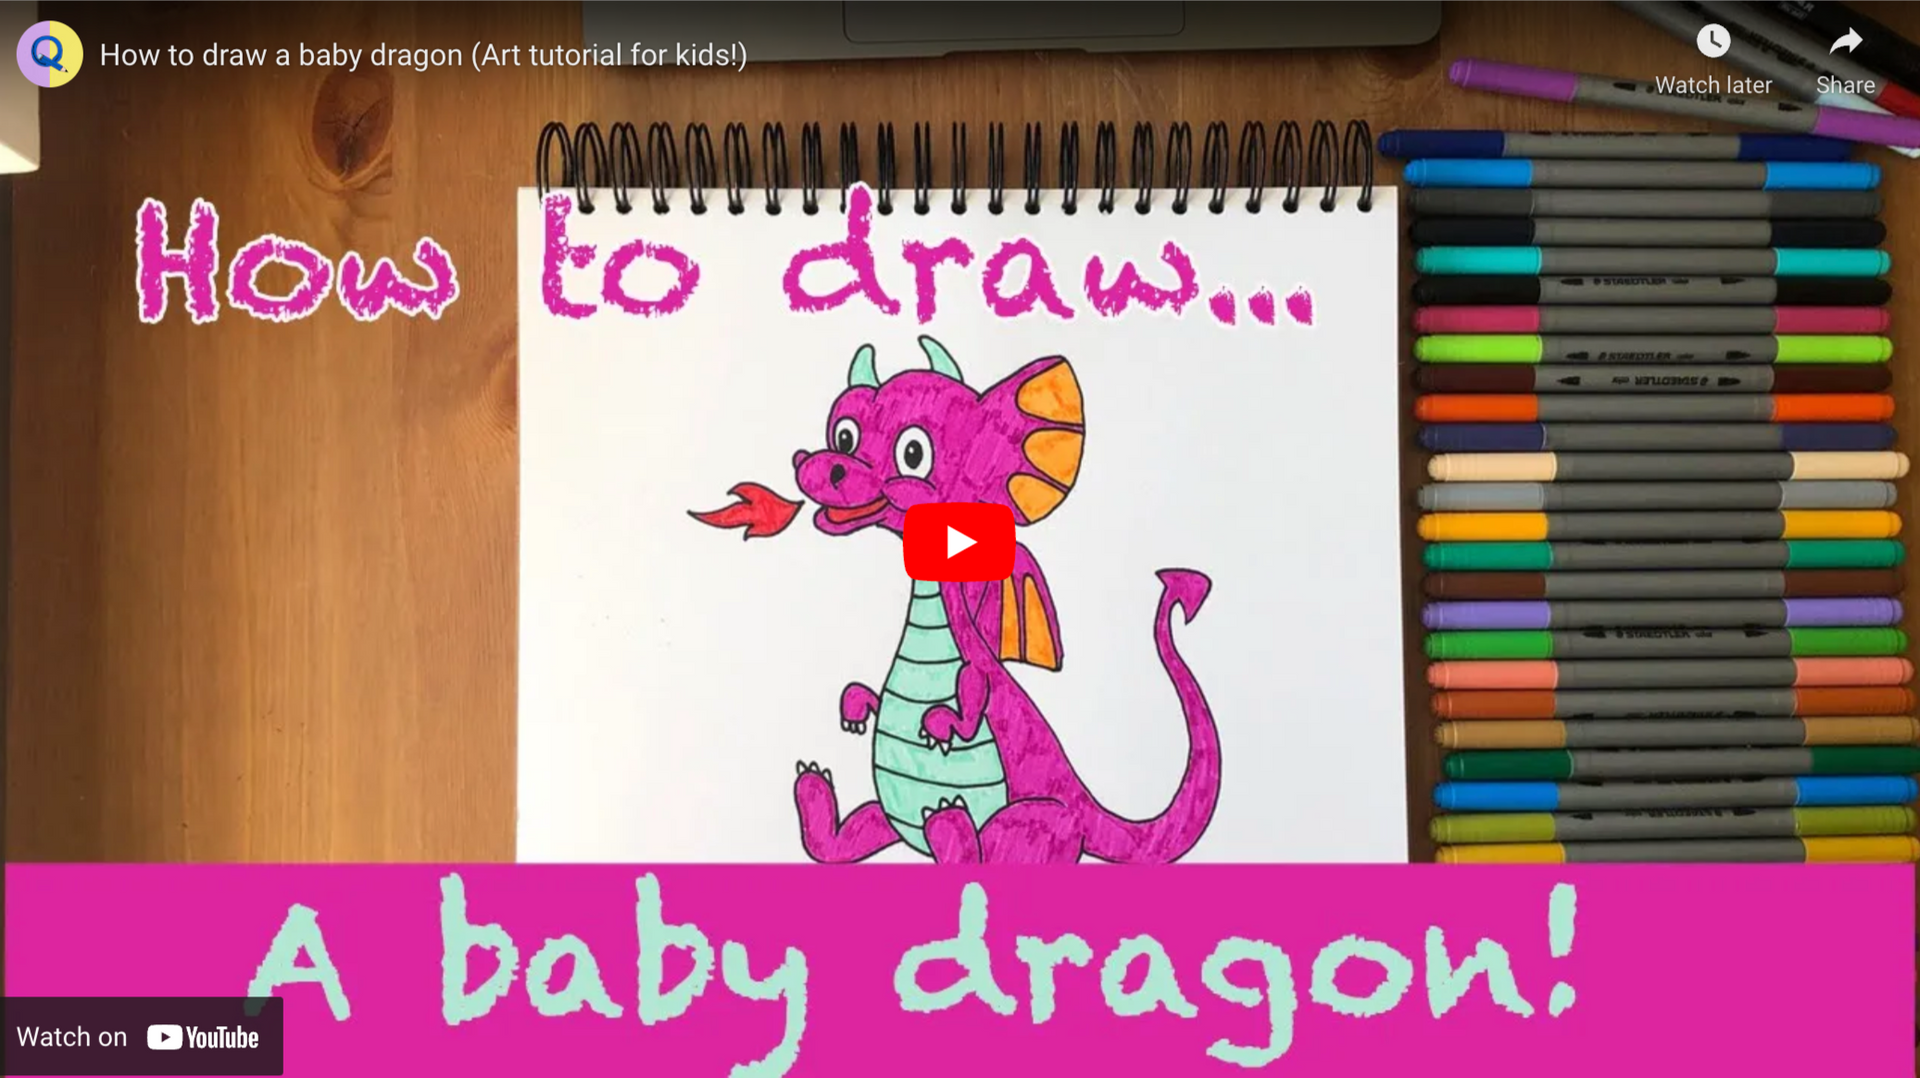 How to Draw a Dragon (Easy Tutorial)